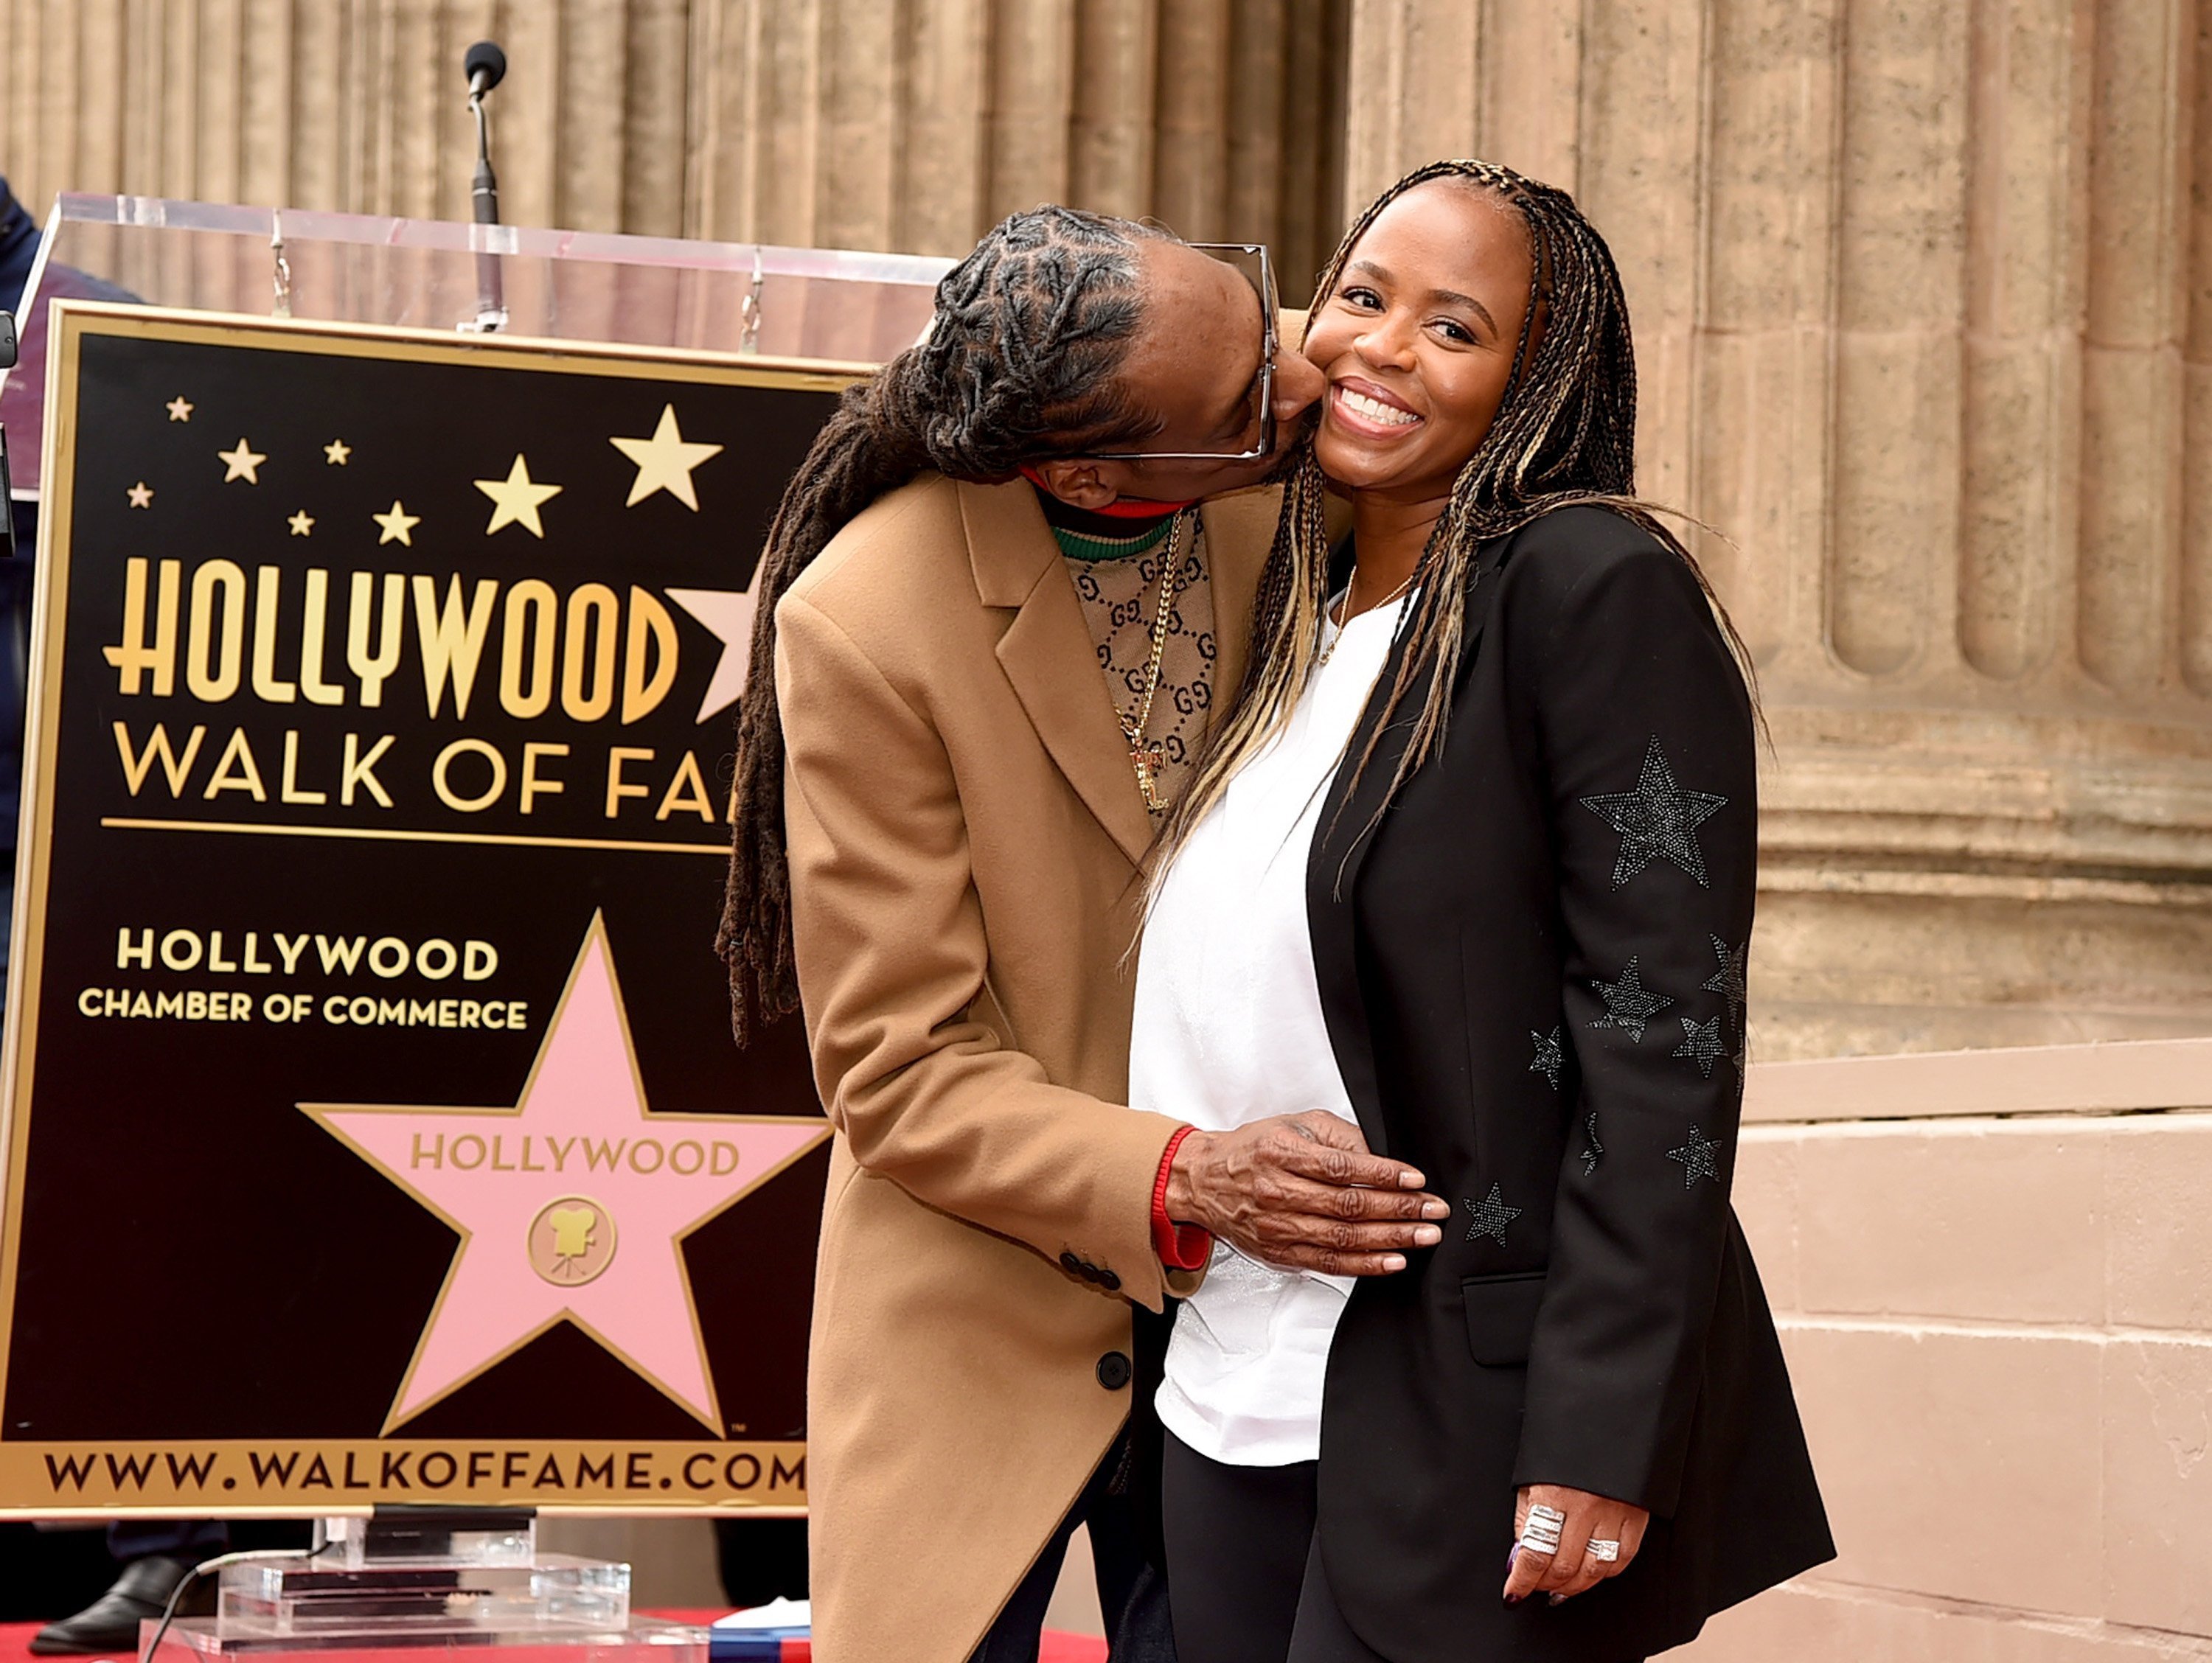 Snoop Dogg and Shante Broadus at the Hollywood Walk of Fame on Hollywood Boulevard in November 2018. | Source: Getty Images/GlobalImagesUkraine